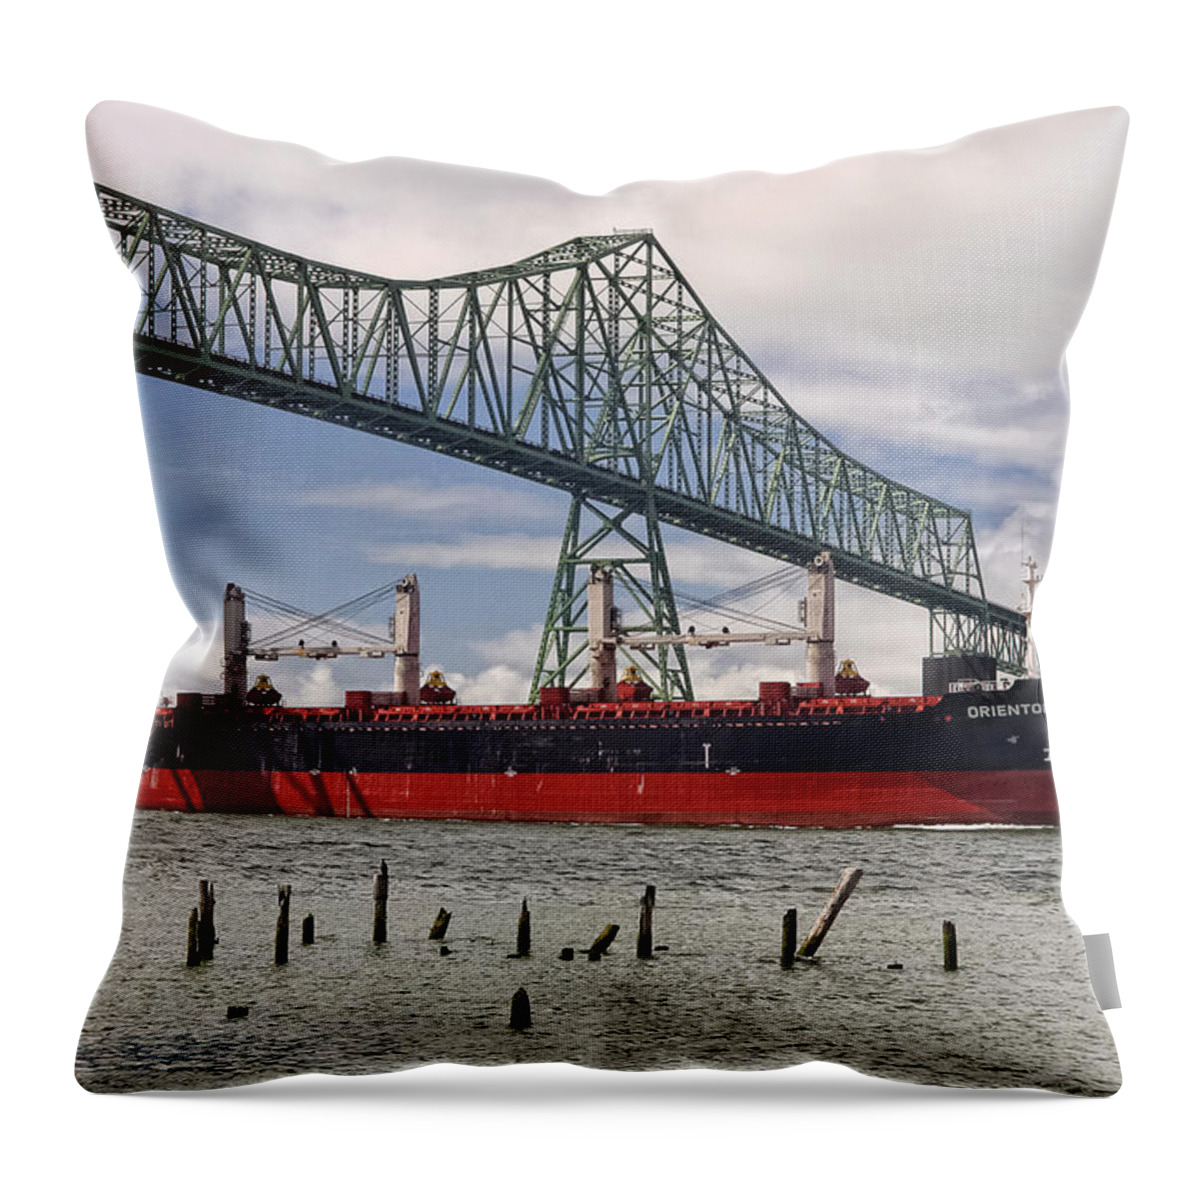 Orientor 2 Throw Pillow featuring the photograph Orientor 2 #2 by Wes and Dotty Weber